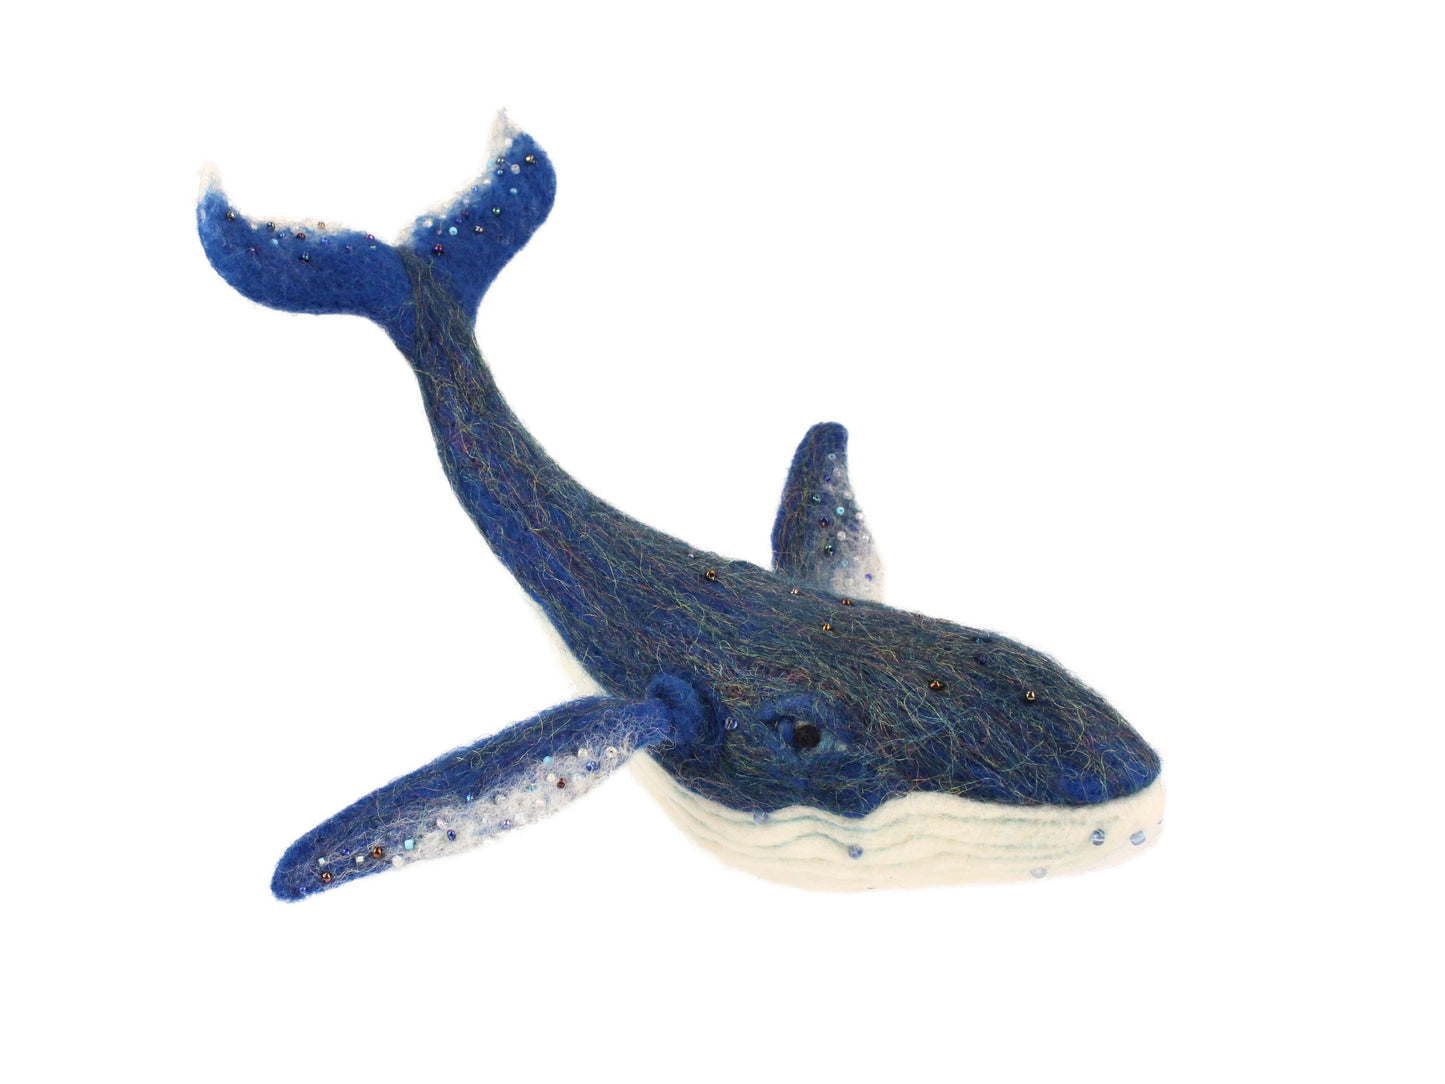 Blue Whale Needle Felt Pack - with or without tools - The Makerss